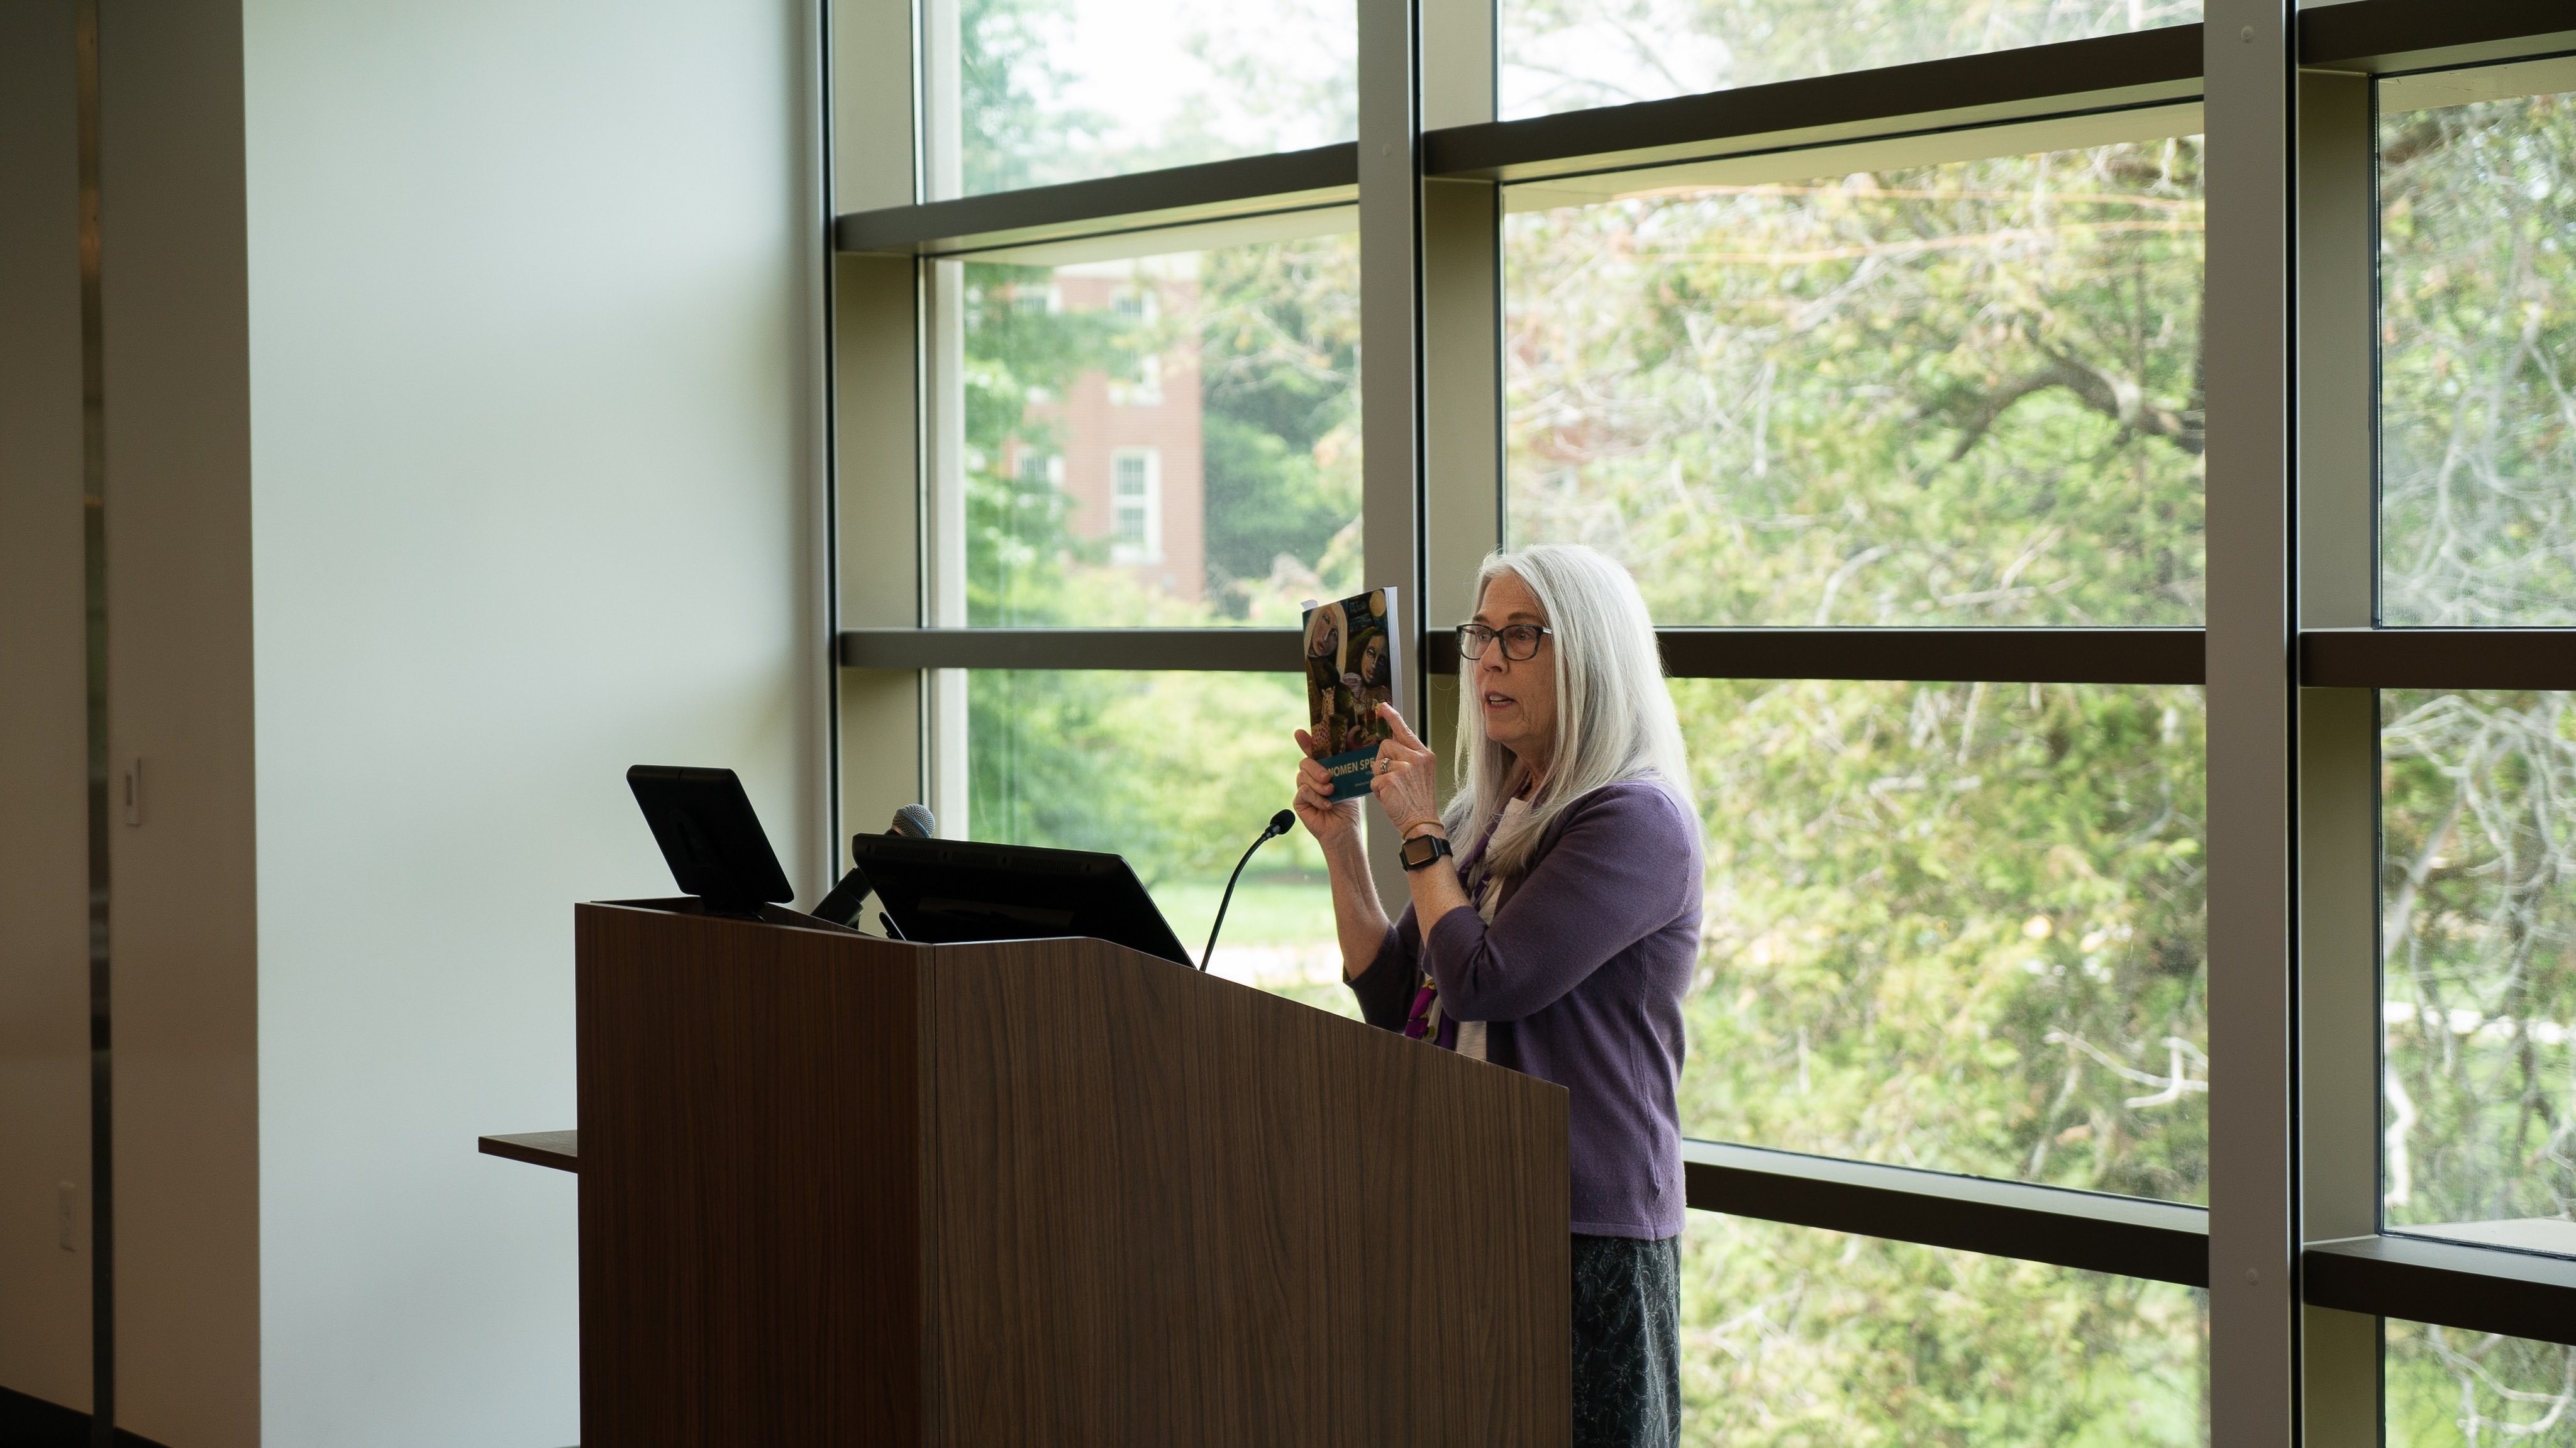 Kari Gunter-Seymour is the Poet Laureate of Ohio and the founder of the Women of Appalachia Project. Here, she holds up the 8th Volume of the "Women Speak" Anthology before the ETSU event. 